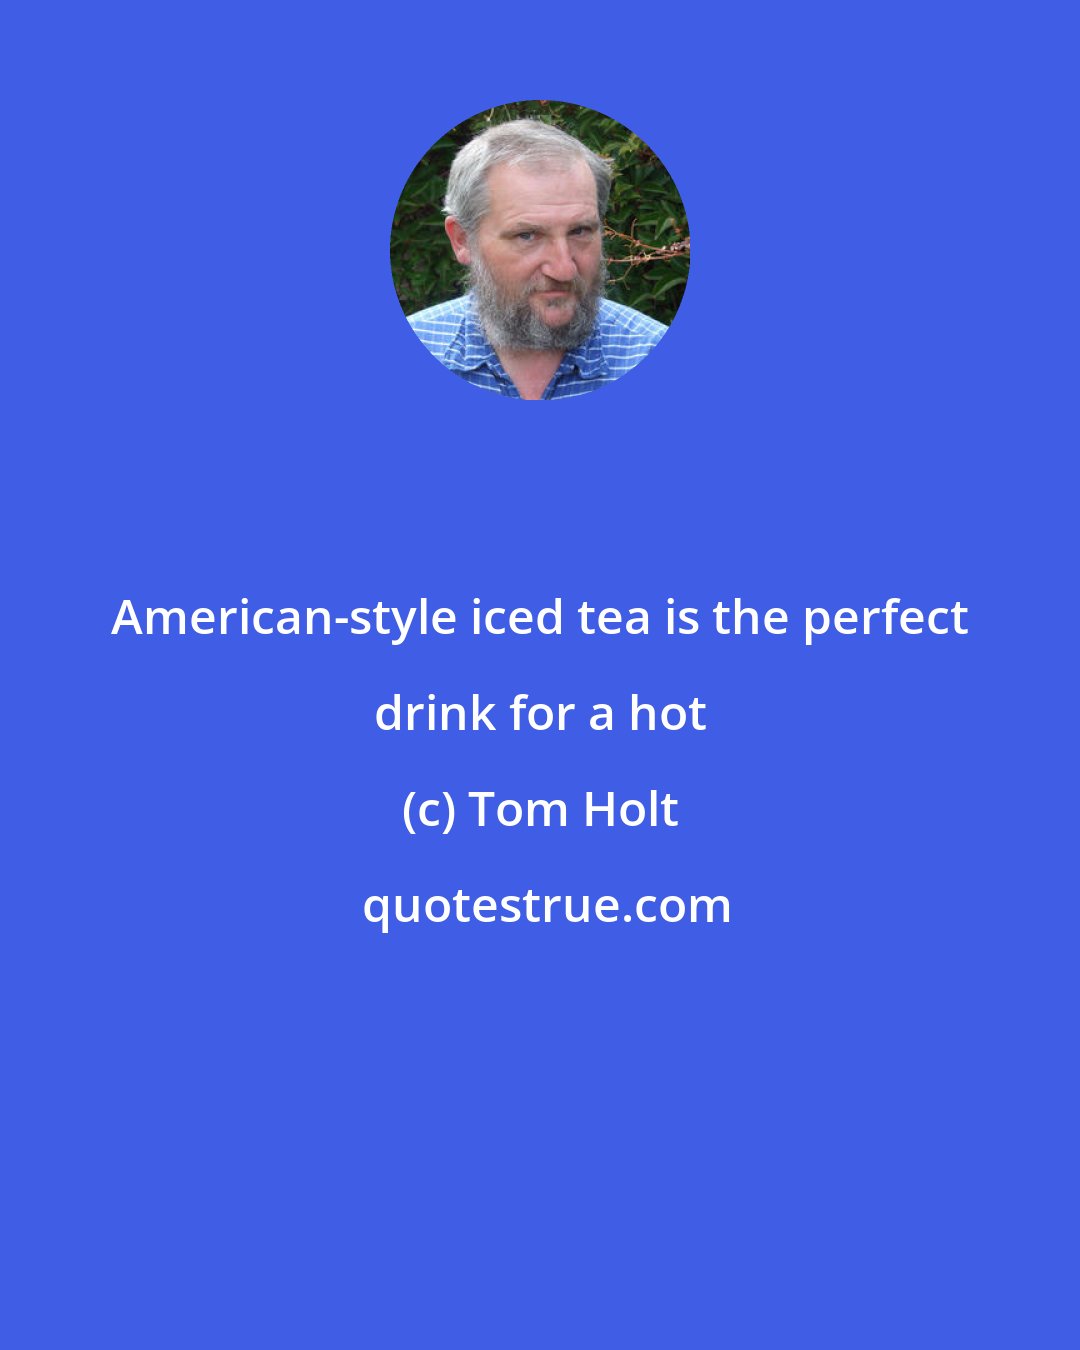 Tom Holt: American-style iced tea is the perfect drink for a hot